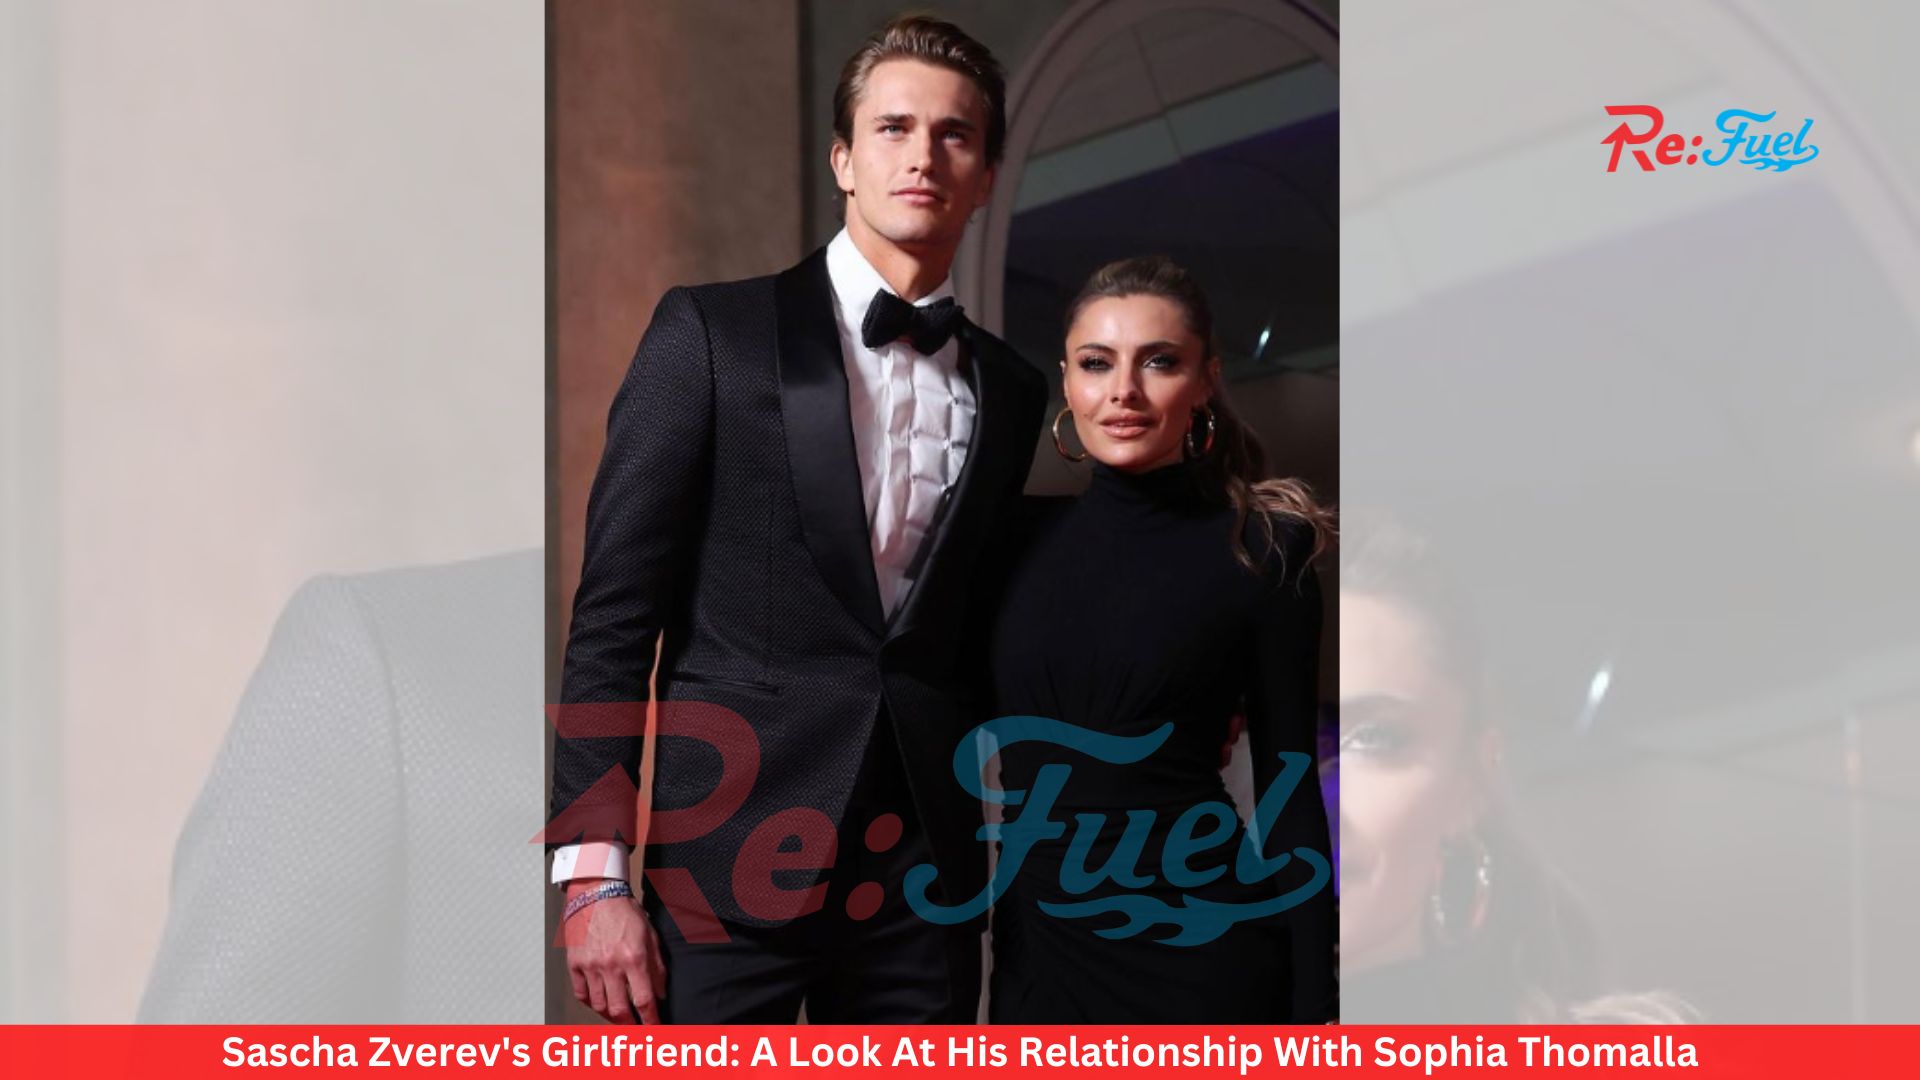 Sascha Zverev's Girlfriend: A Look At His Relationship With Sophia Thomalla